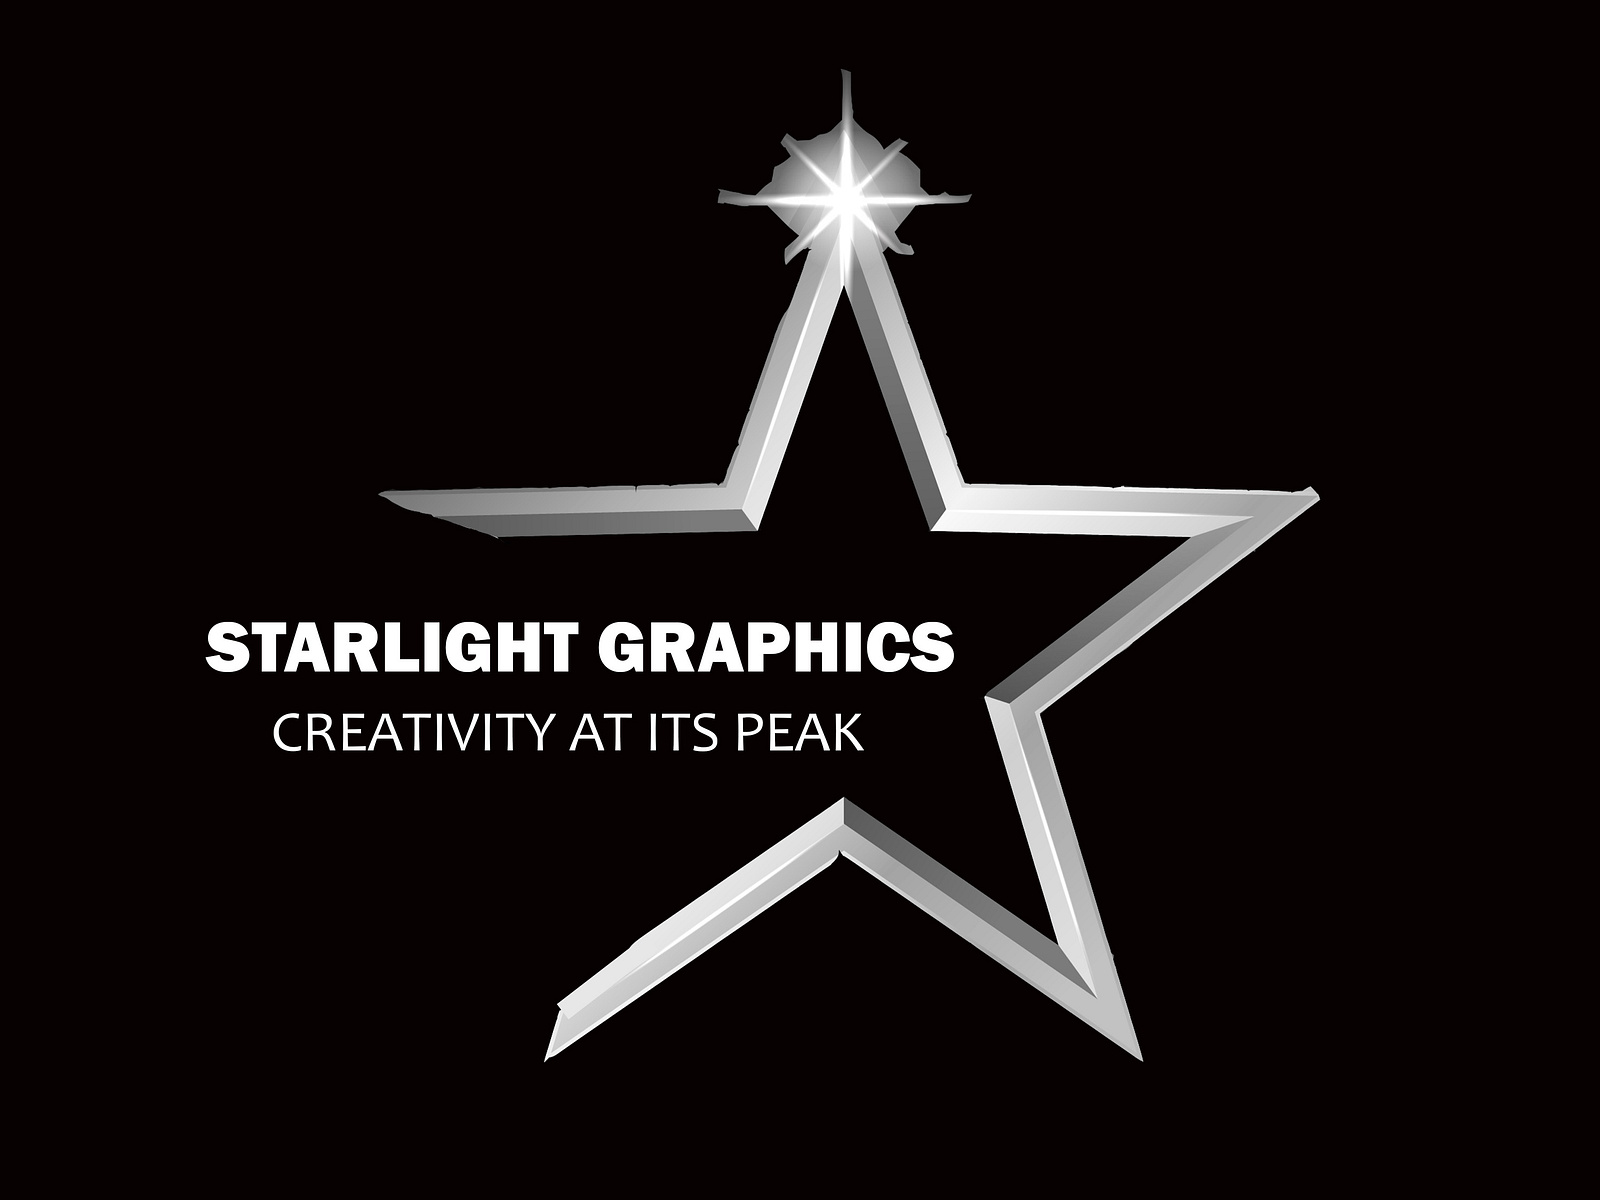 STARLIGHT GRAPHICS by Ibrahim Ismail on Dribbble